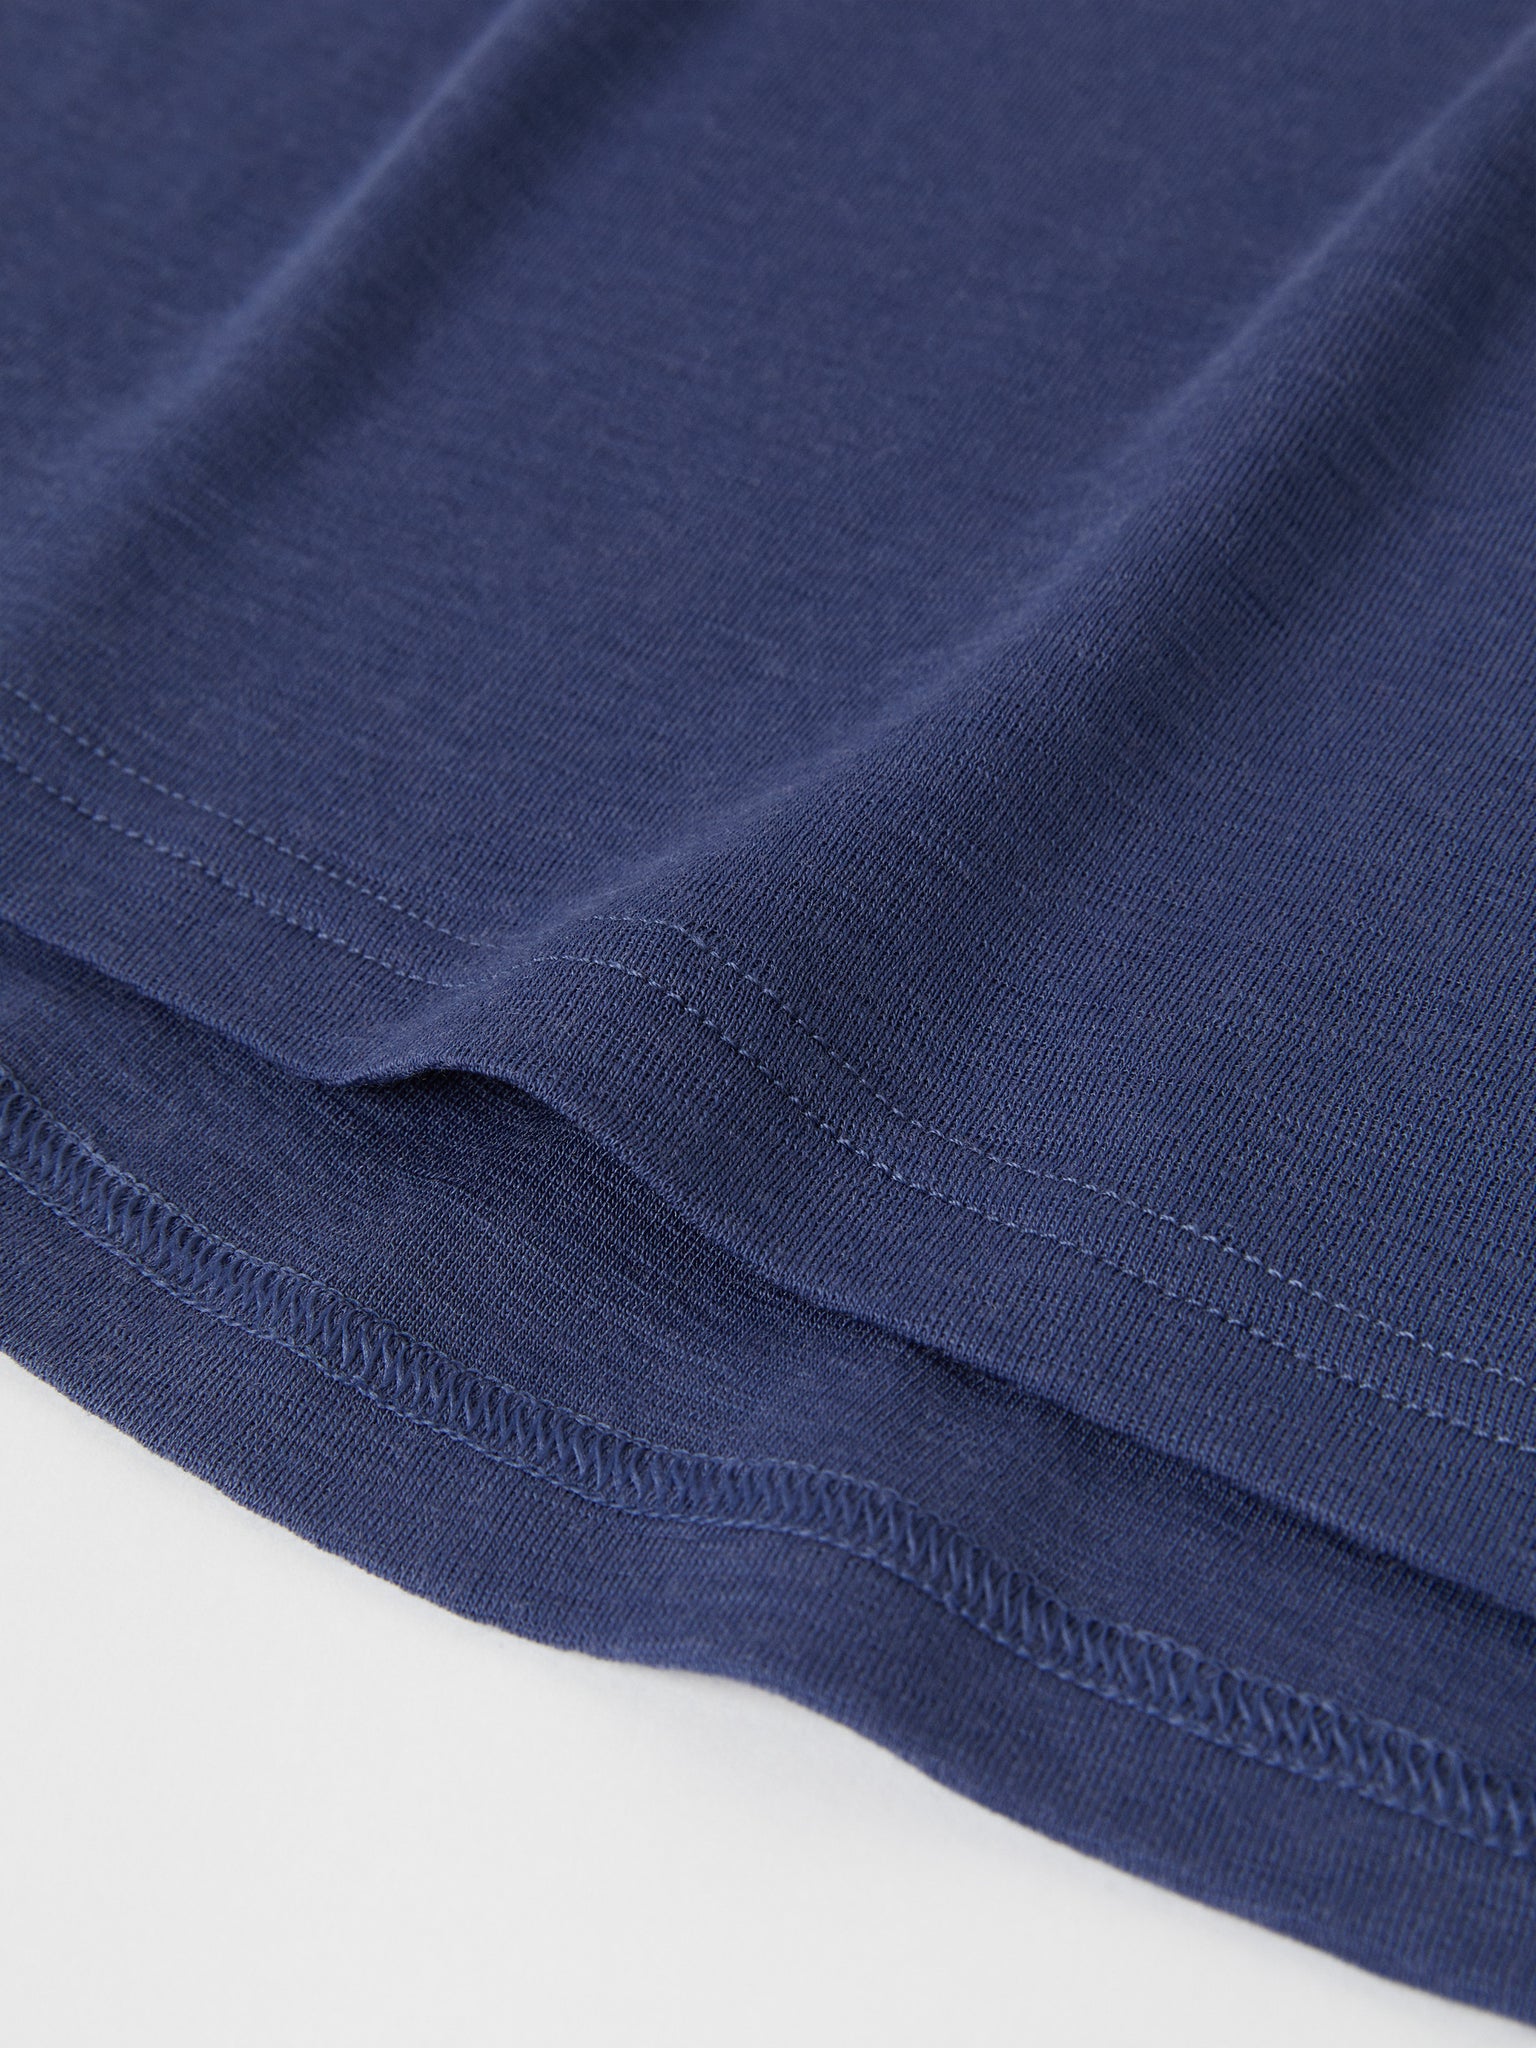 Blue Adult Merino Wool Thermal Top from the Polarn O. Pyret outerwear collection. Made using ethically sourced materials.